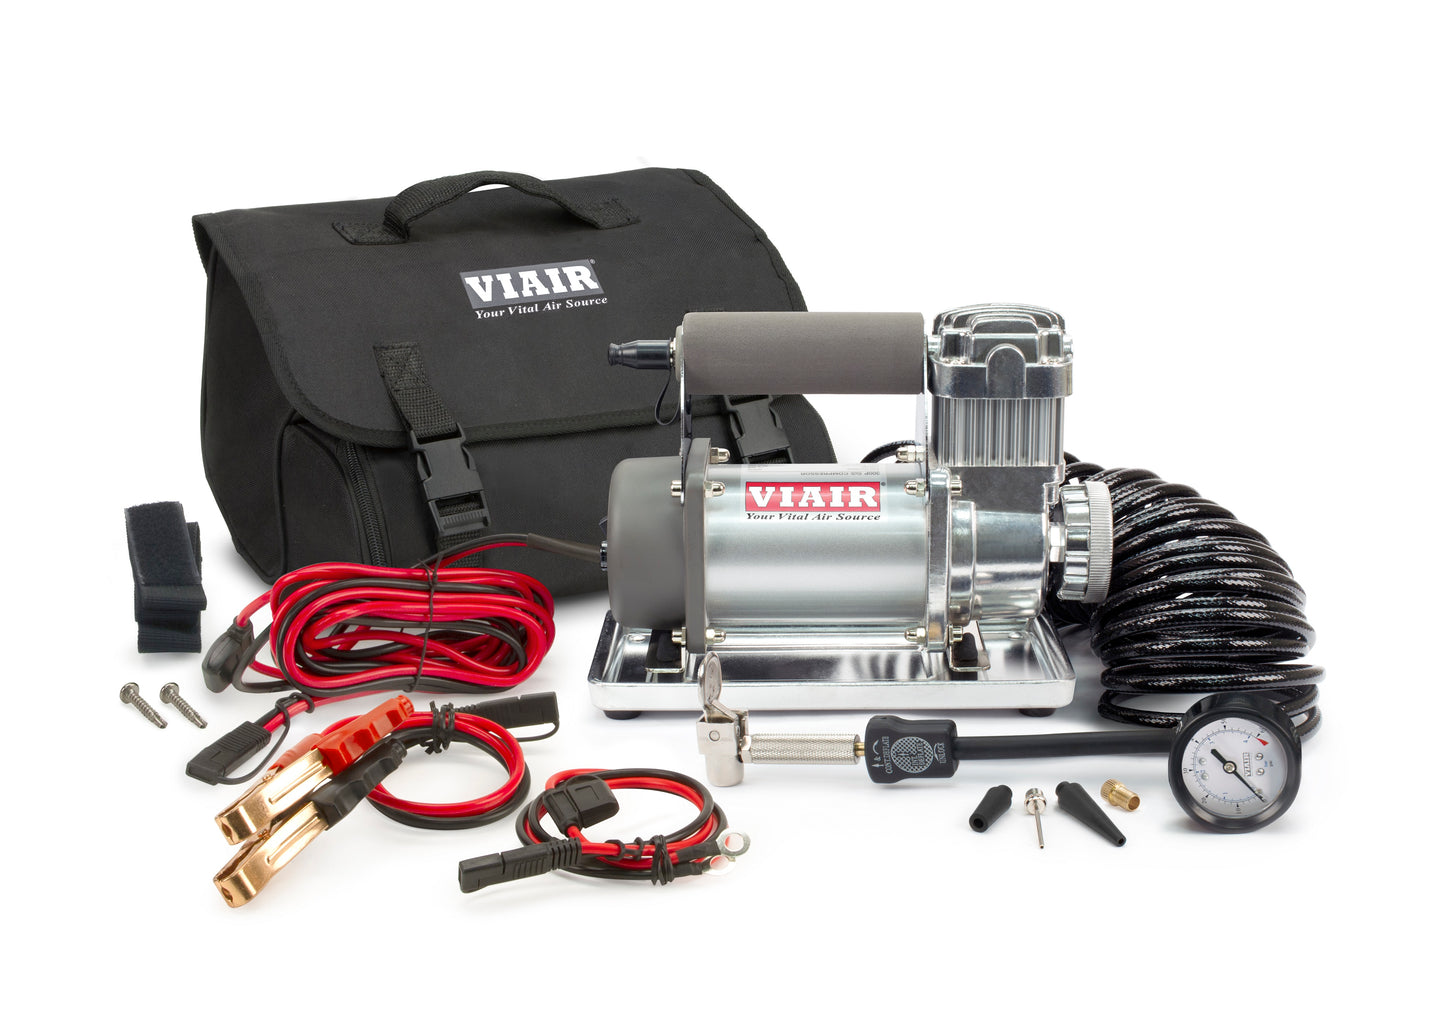 VIAIR 300P SxS Portable Compressor Kit with battery tender and compressor tie down (12V, 33% Duty, 150 PSI), CE.